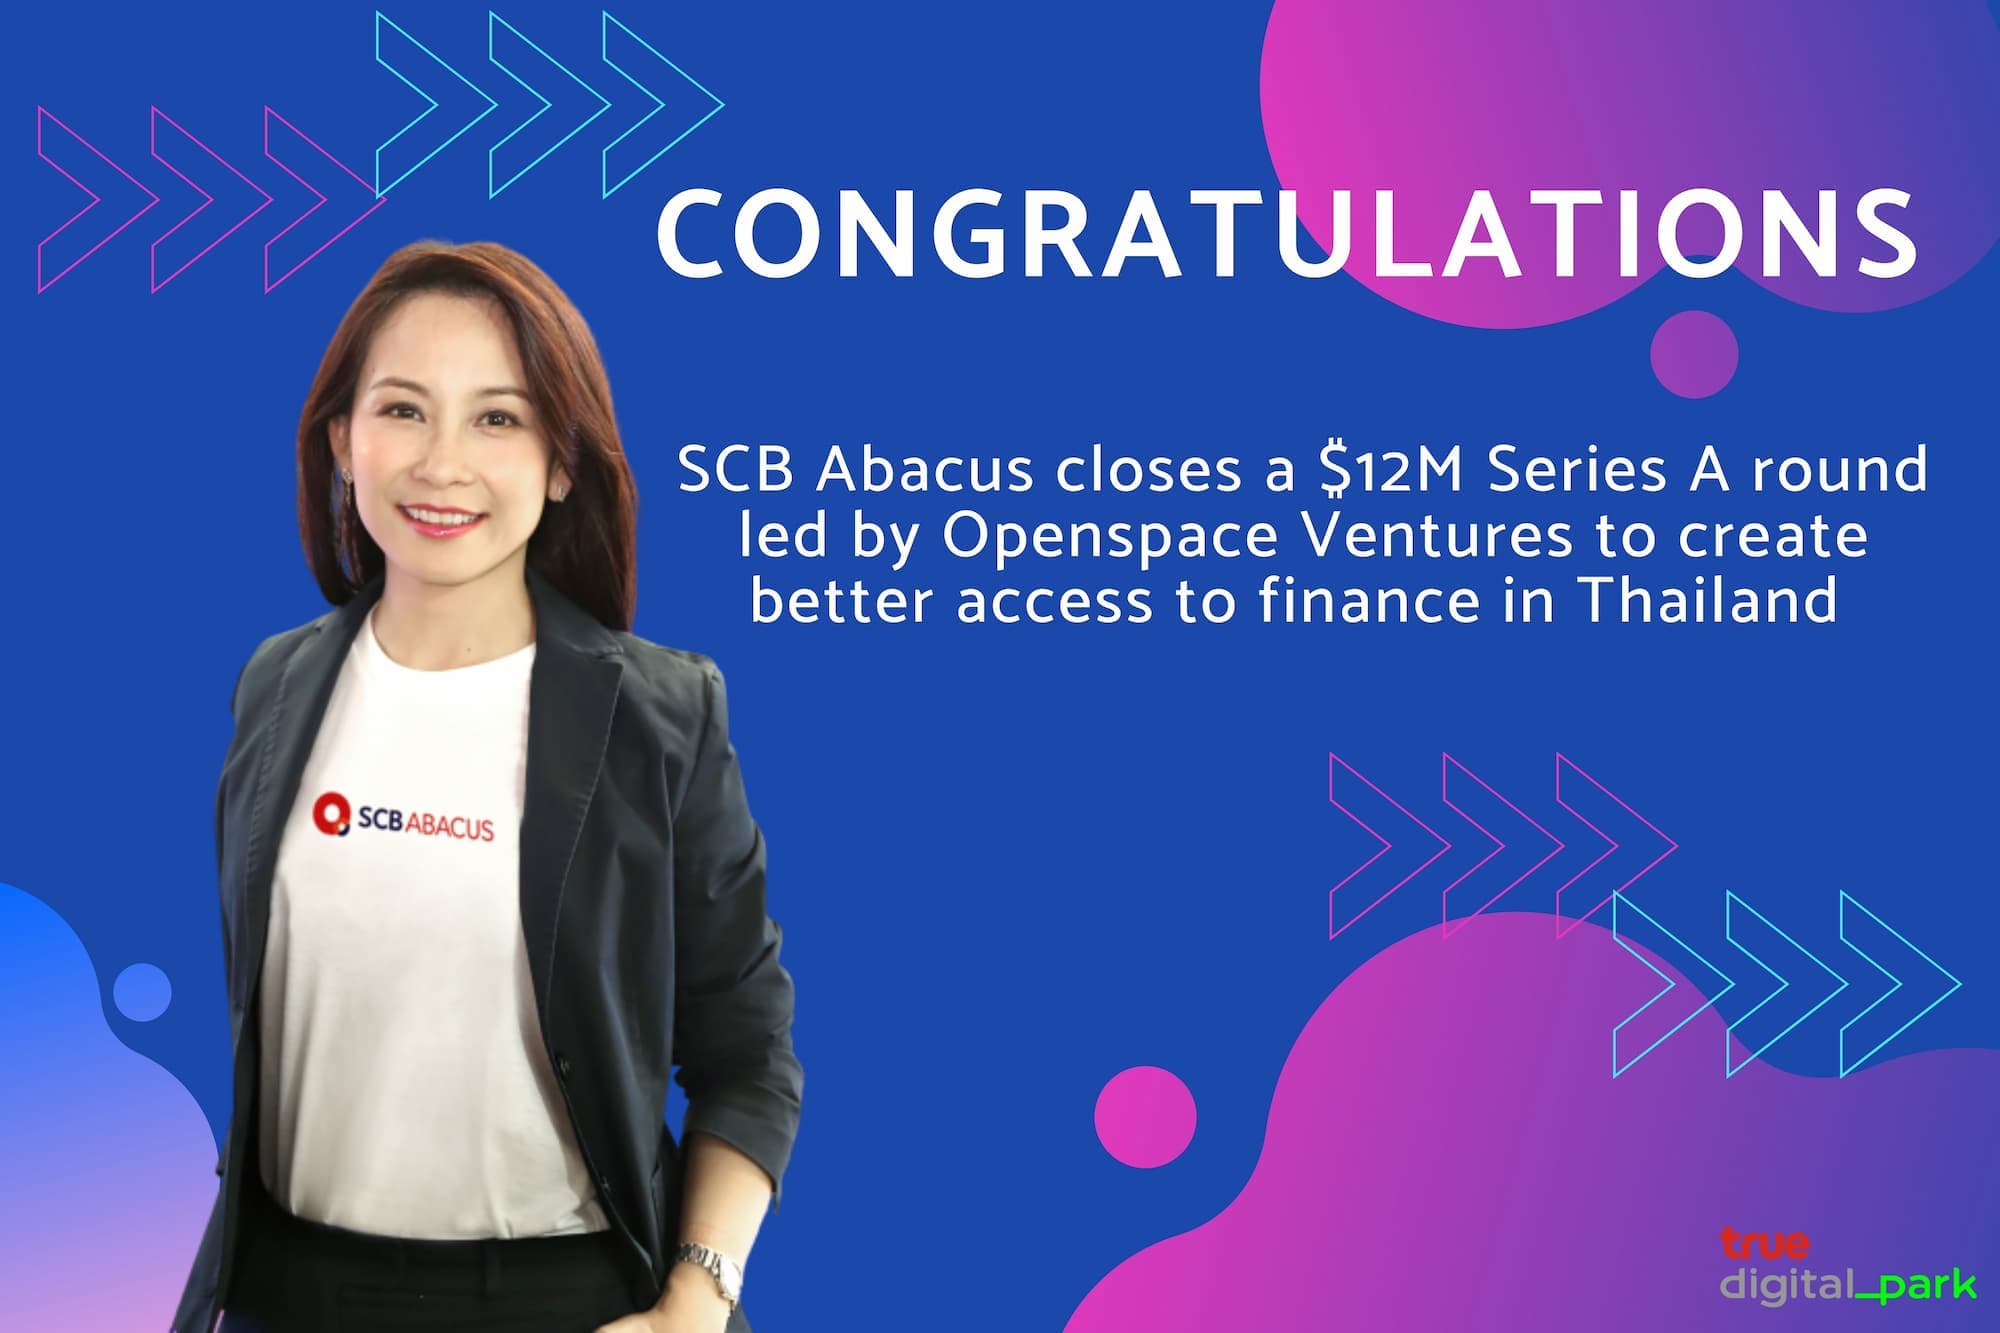 SCB Abacus closes a $12M Series A round led by Openspace Ventures